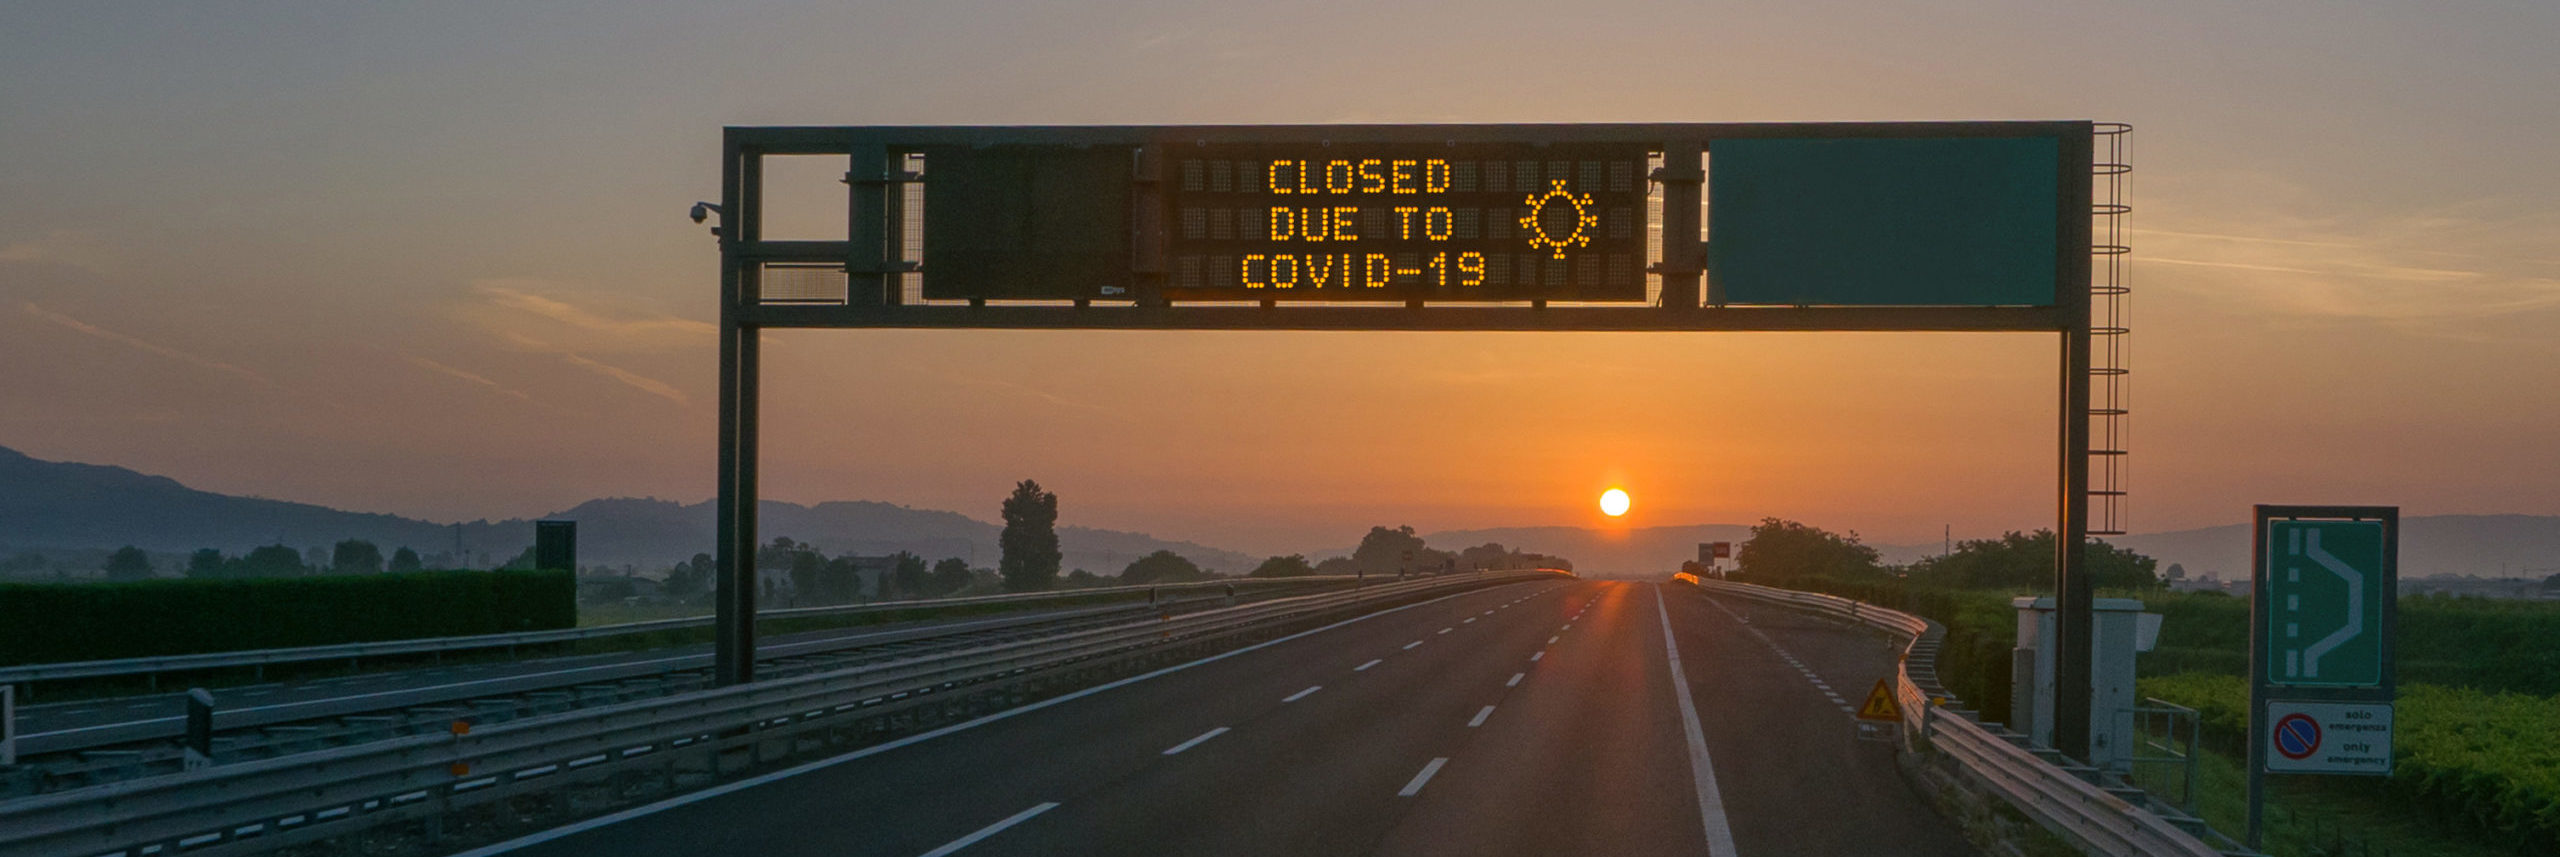 overhead road sign on highway at sunset